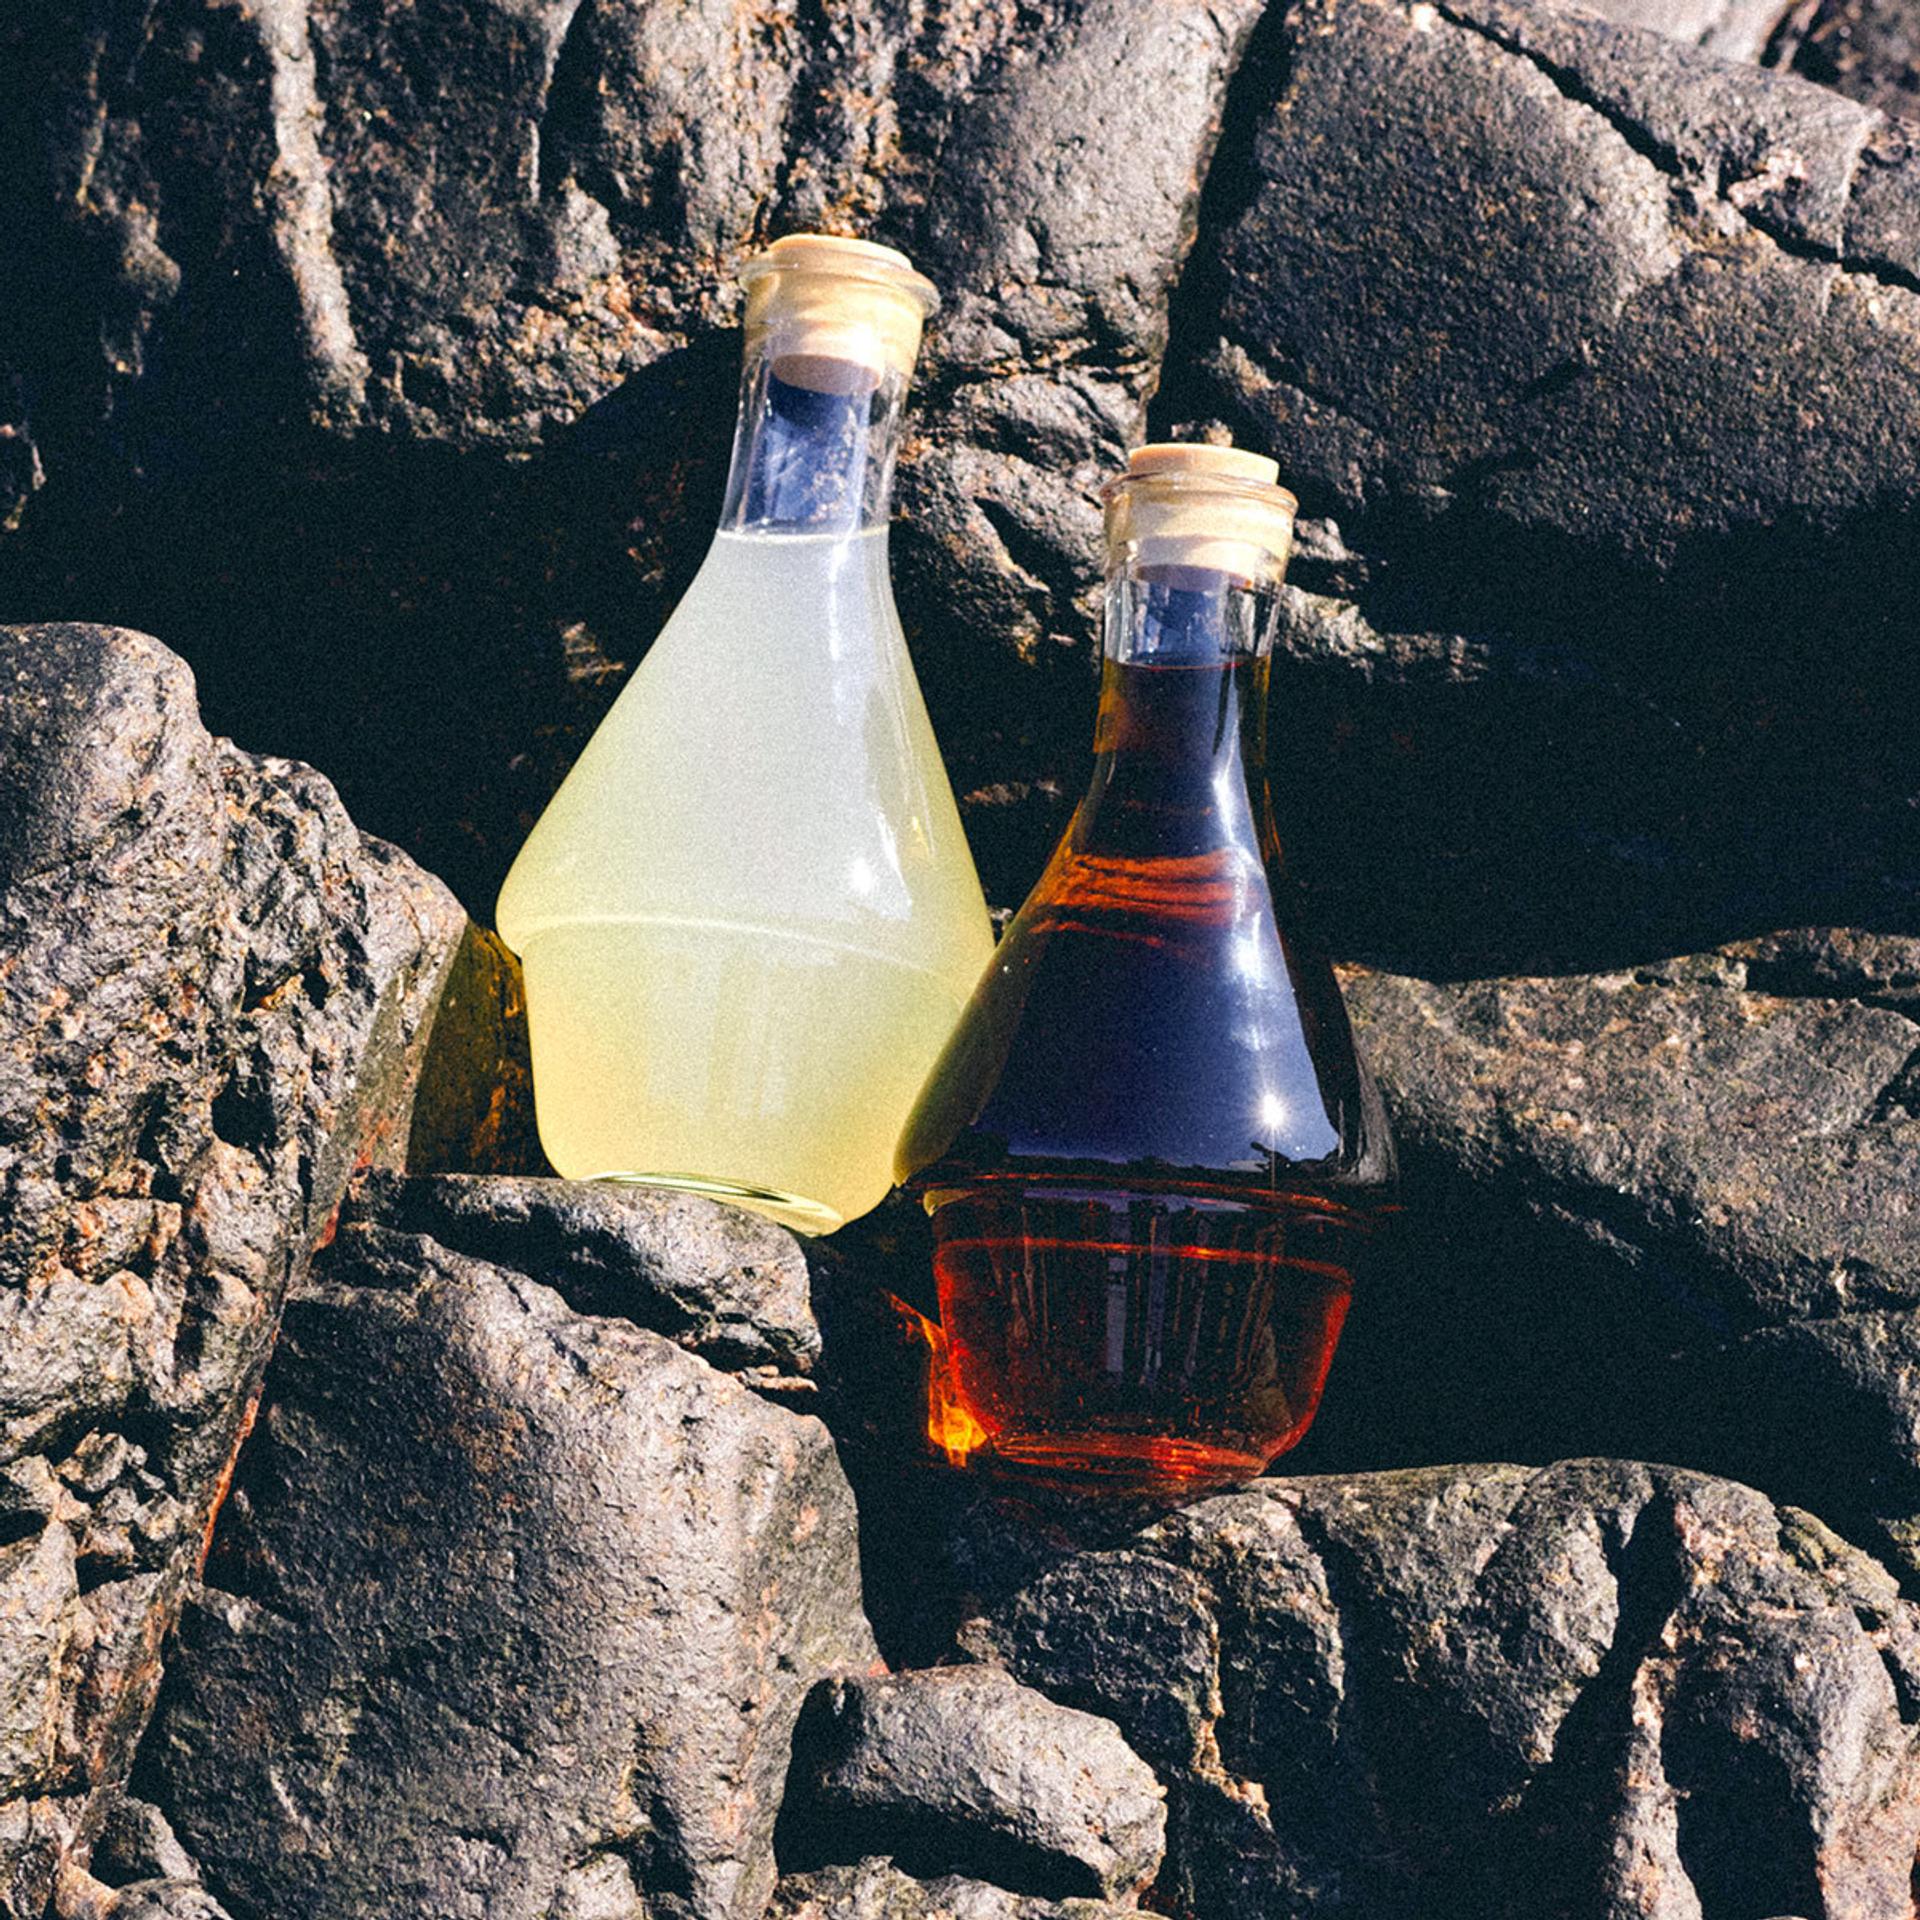 Two glass containers filled with Extract ingredients resting on rocks